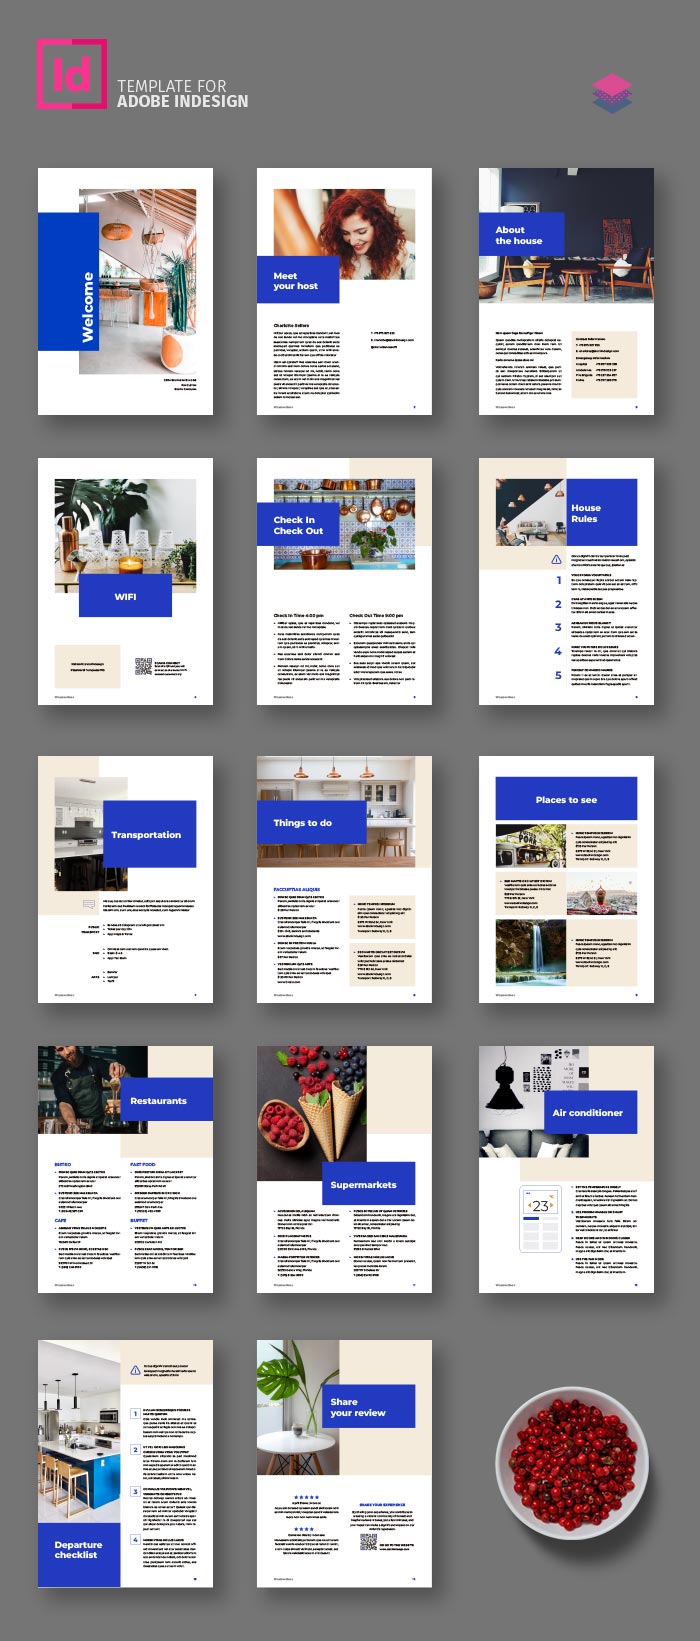 Airbnb Welcome Book Template for Adobe InDesign